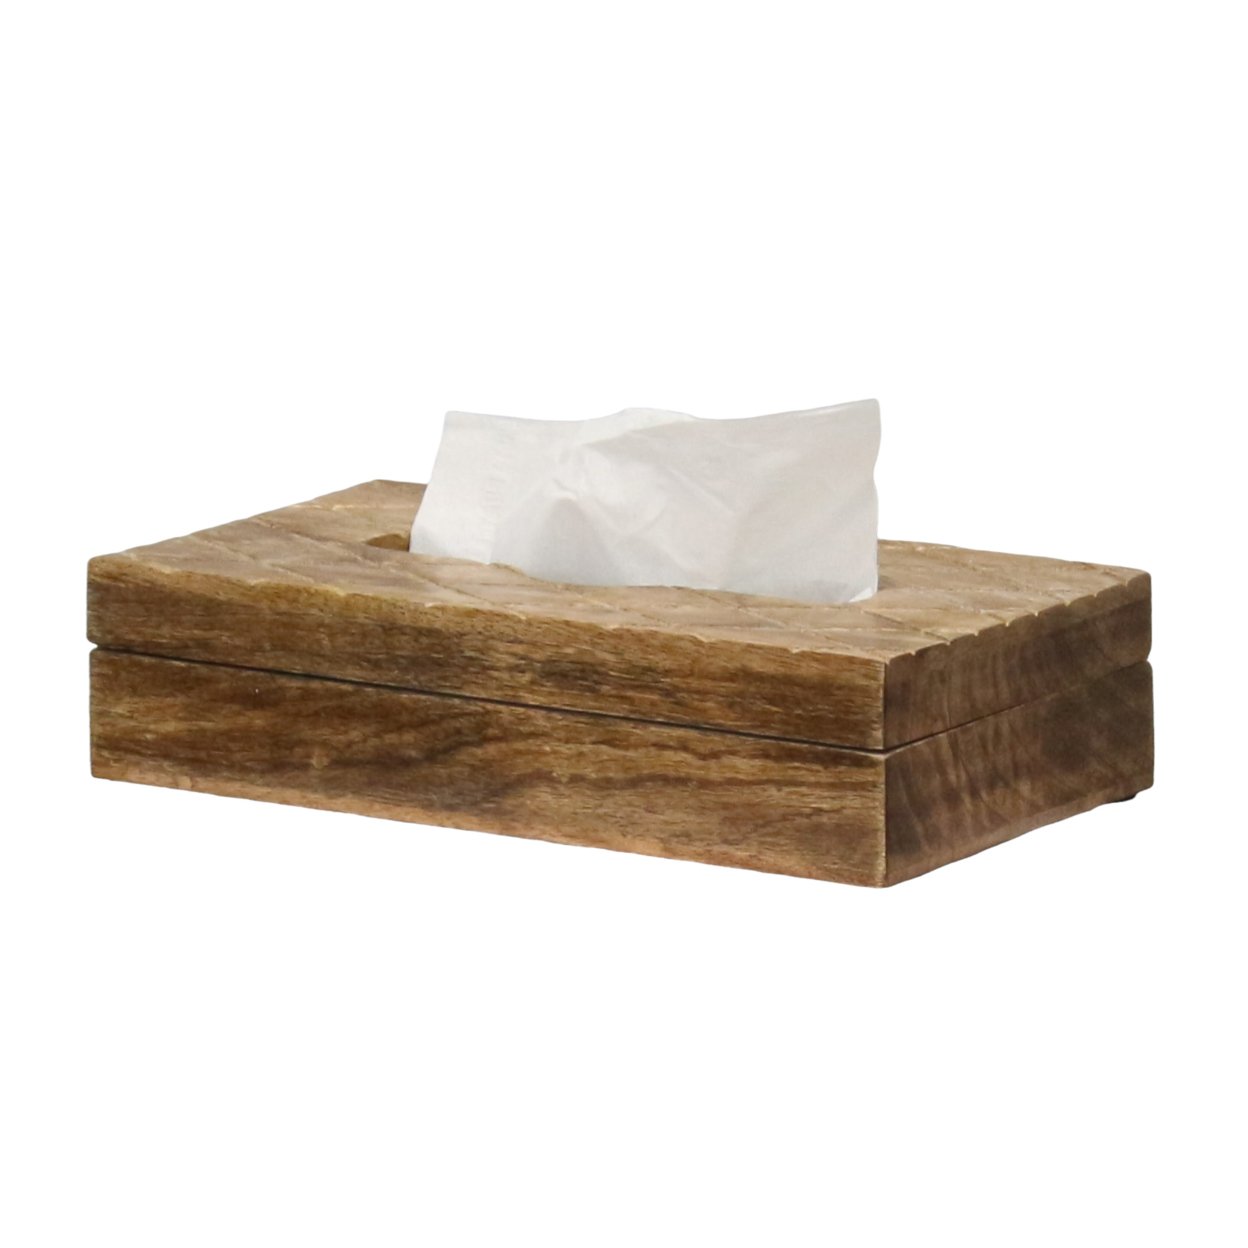 Modern Decorative Paper Facial Tissue Box Holder For Kitchen, Dining Room, And Office - Rectangle Tall